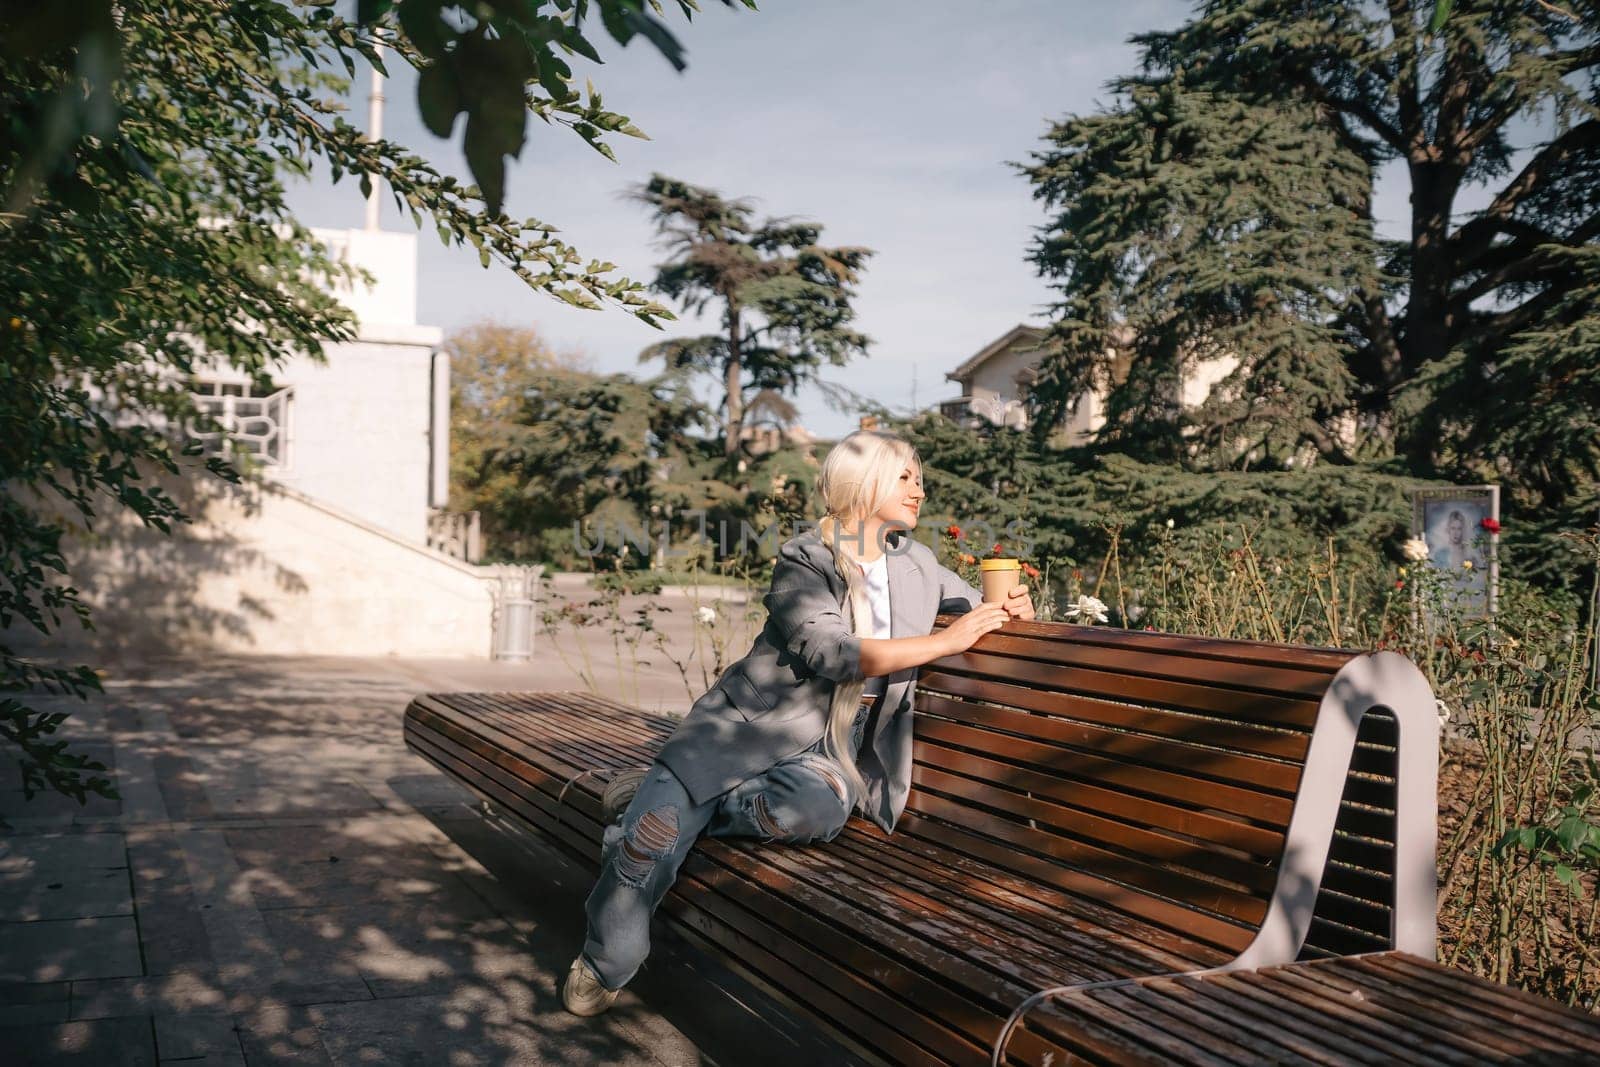 A blonde woman sits on a bench with a cup of coffee in her hand. She is wearing a gray jacket and jeans. The bench is wooden and has a curved back. The scene is peaceful and relaxing